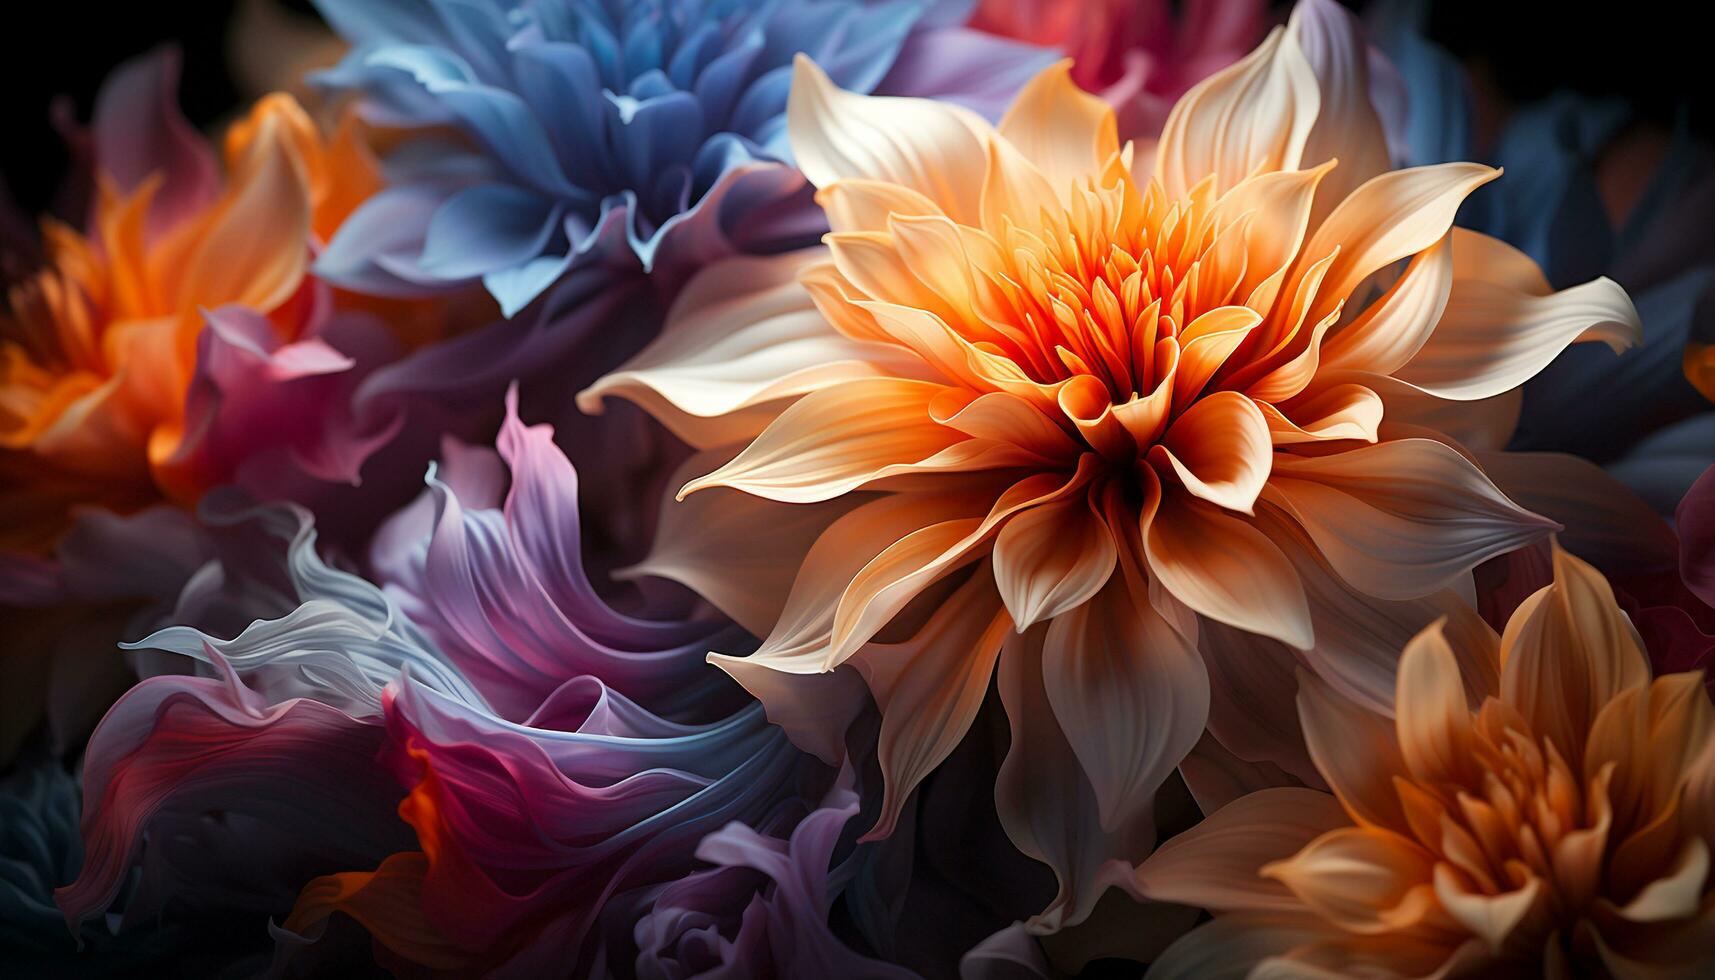 Close up of a vibrant, multi colored flower petal in nature generated by AI photo